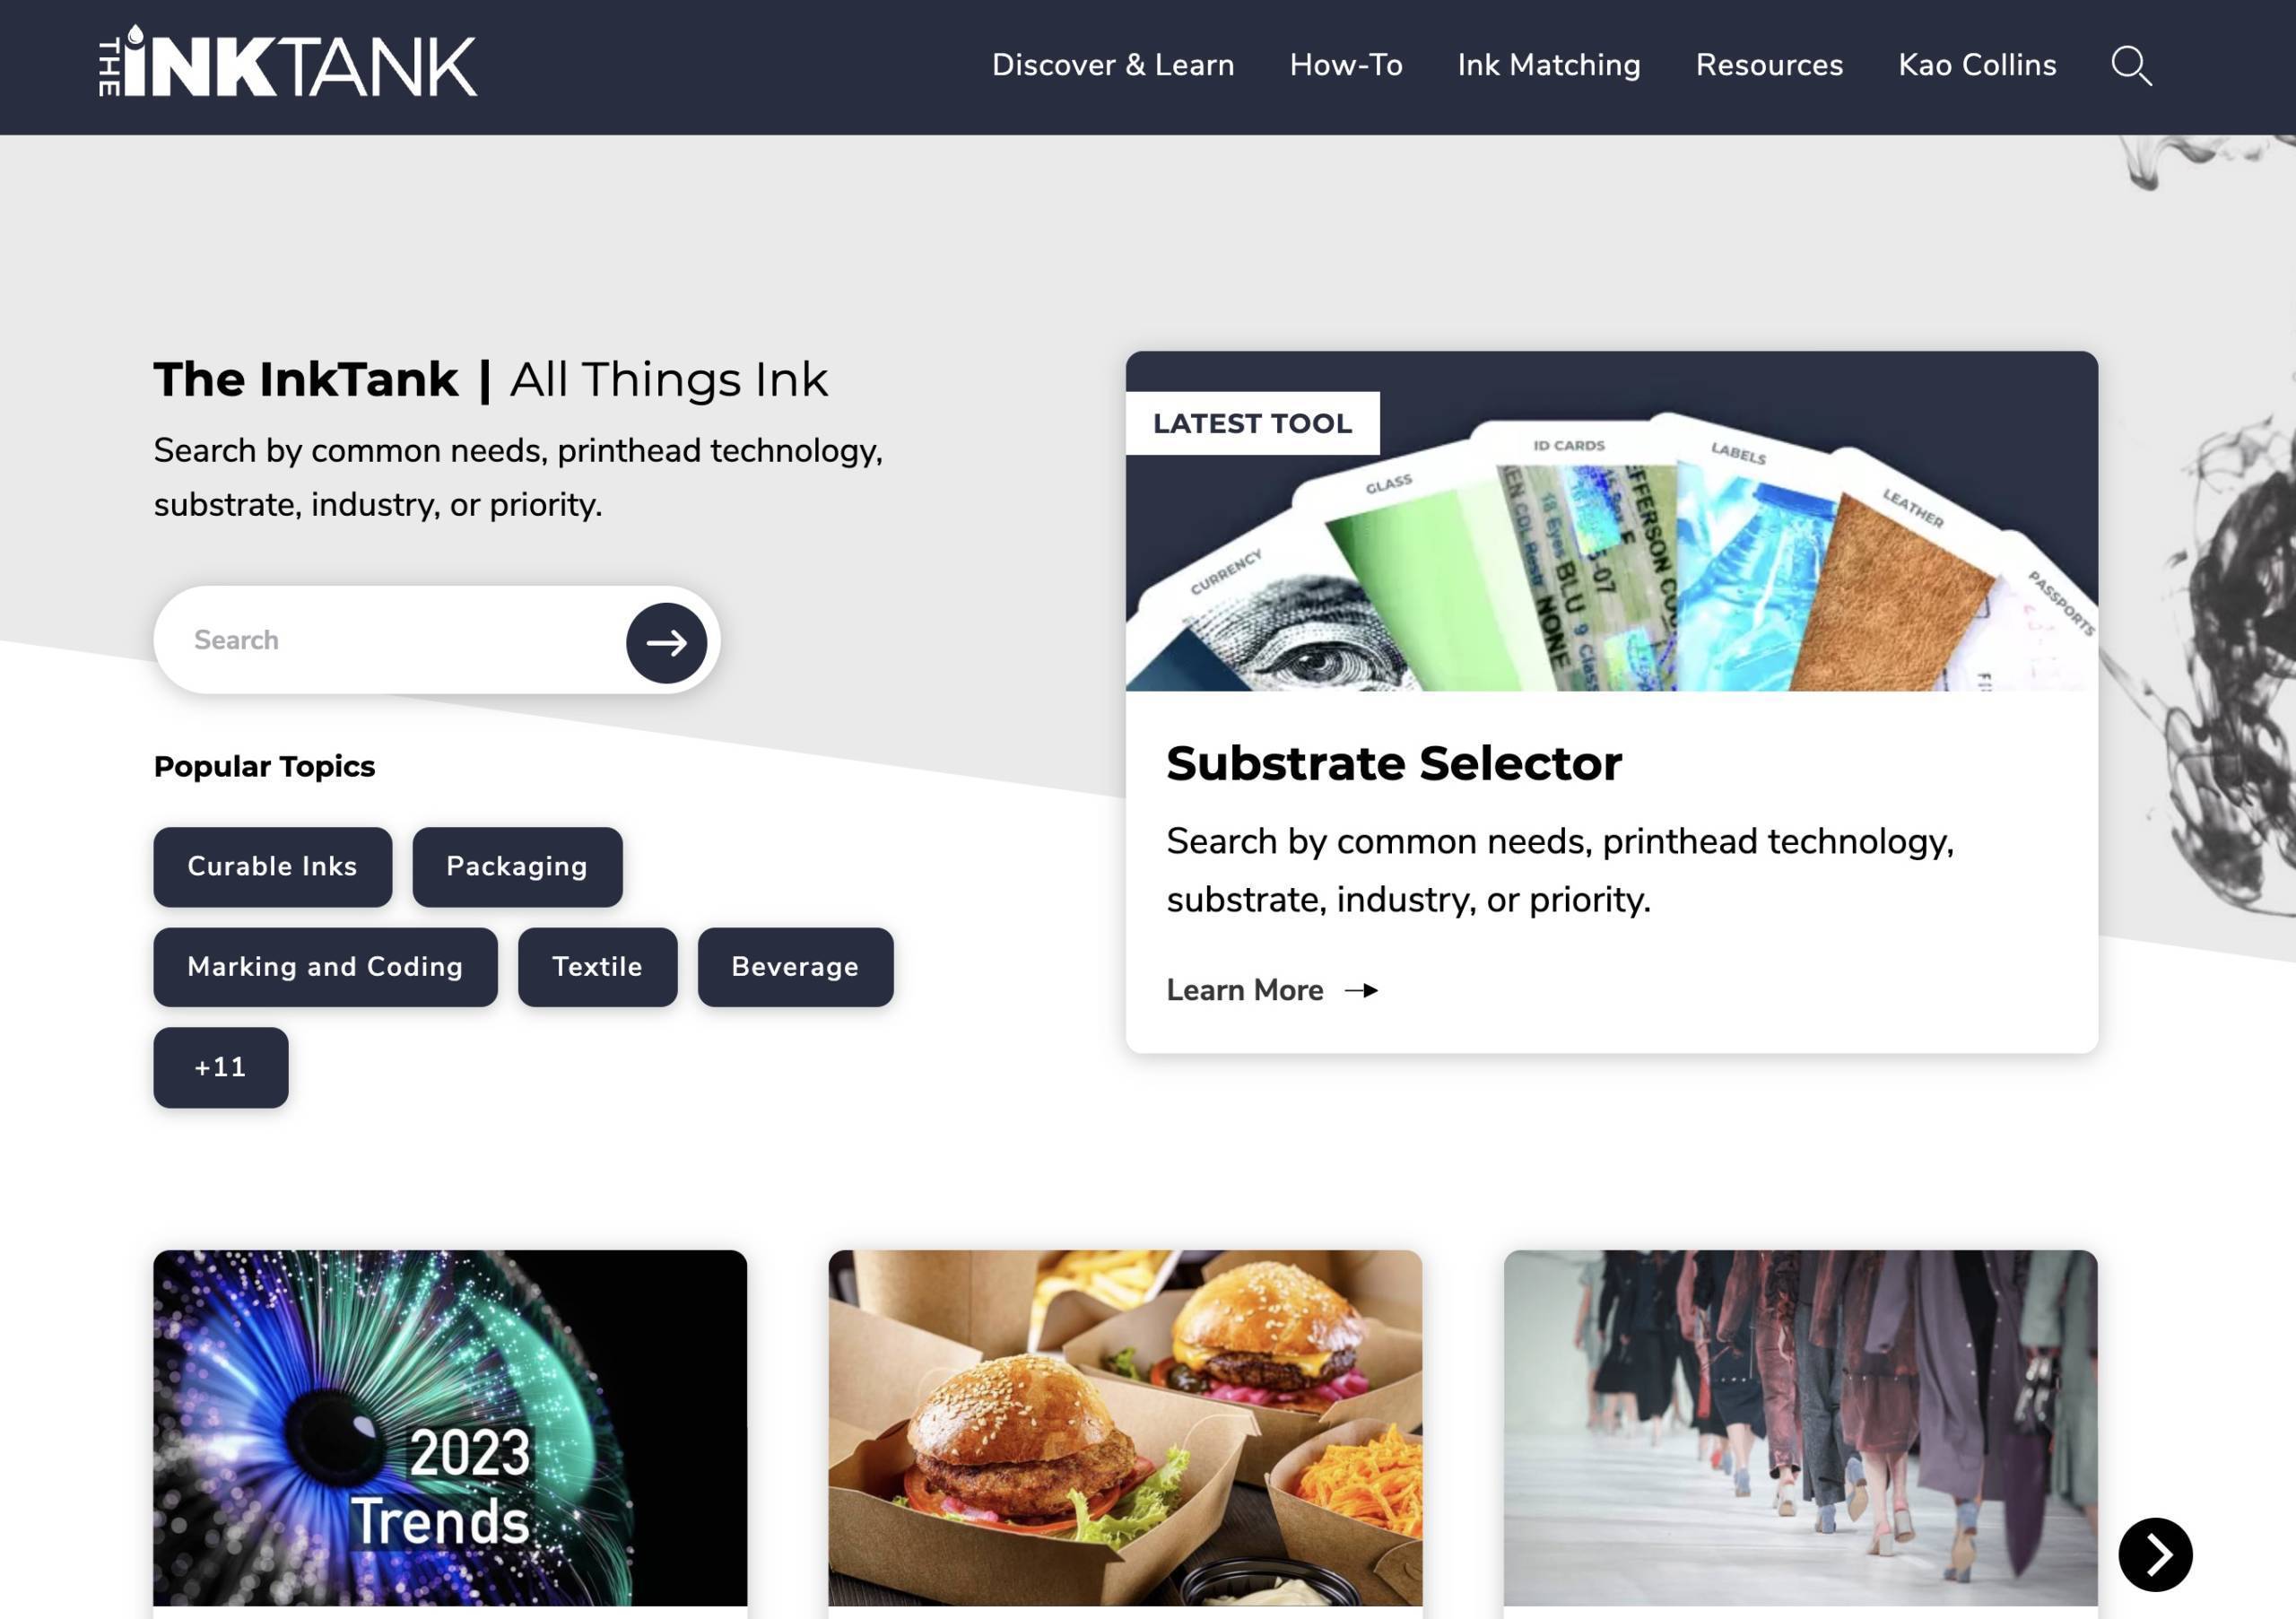 screenshot of the Ink Tank where Kao Collins publishes website content that supports its online marketing goals